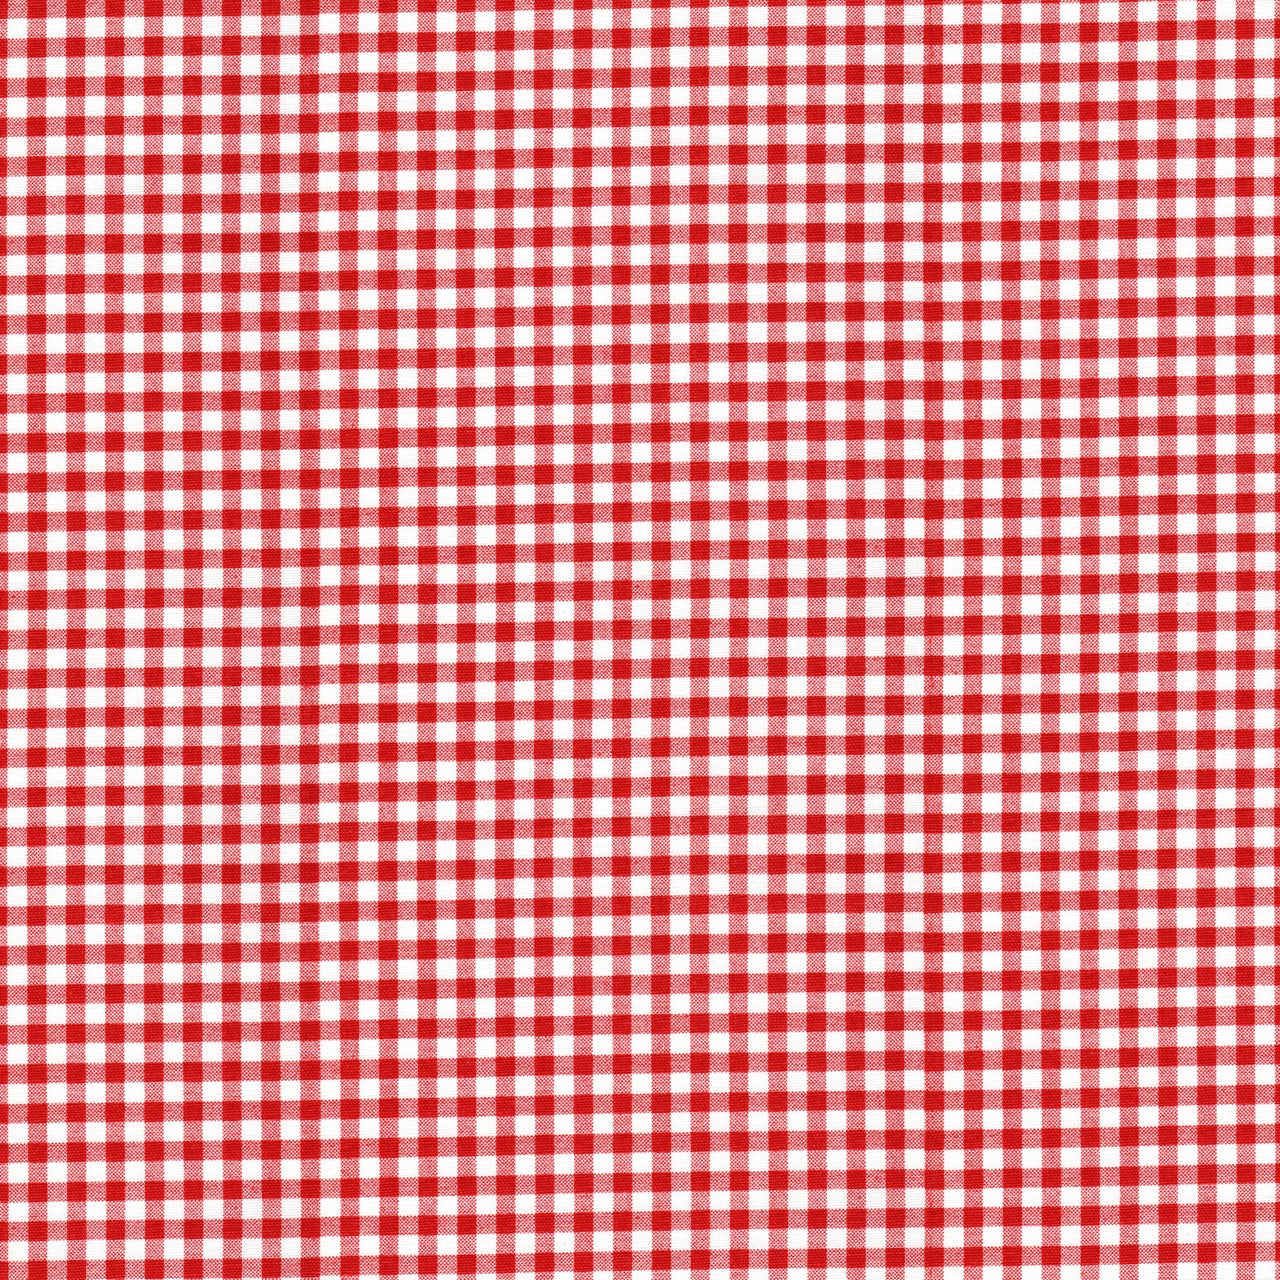 Tab Top Curtains in Lipstick Red Large Gingham Check on White